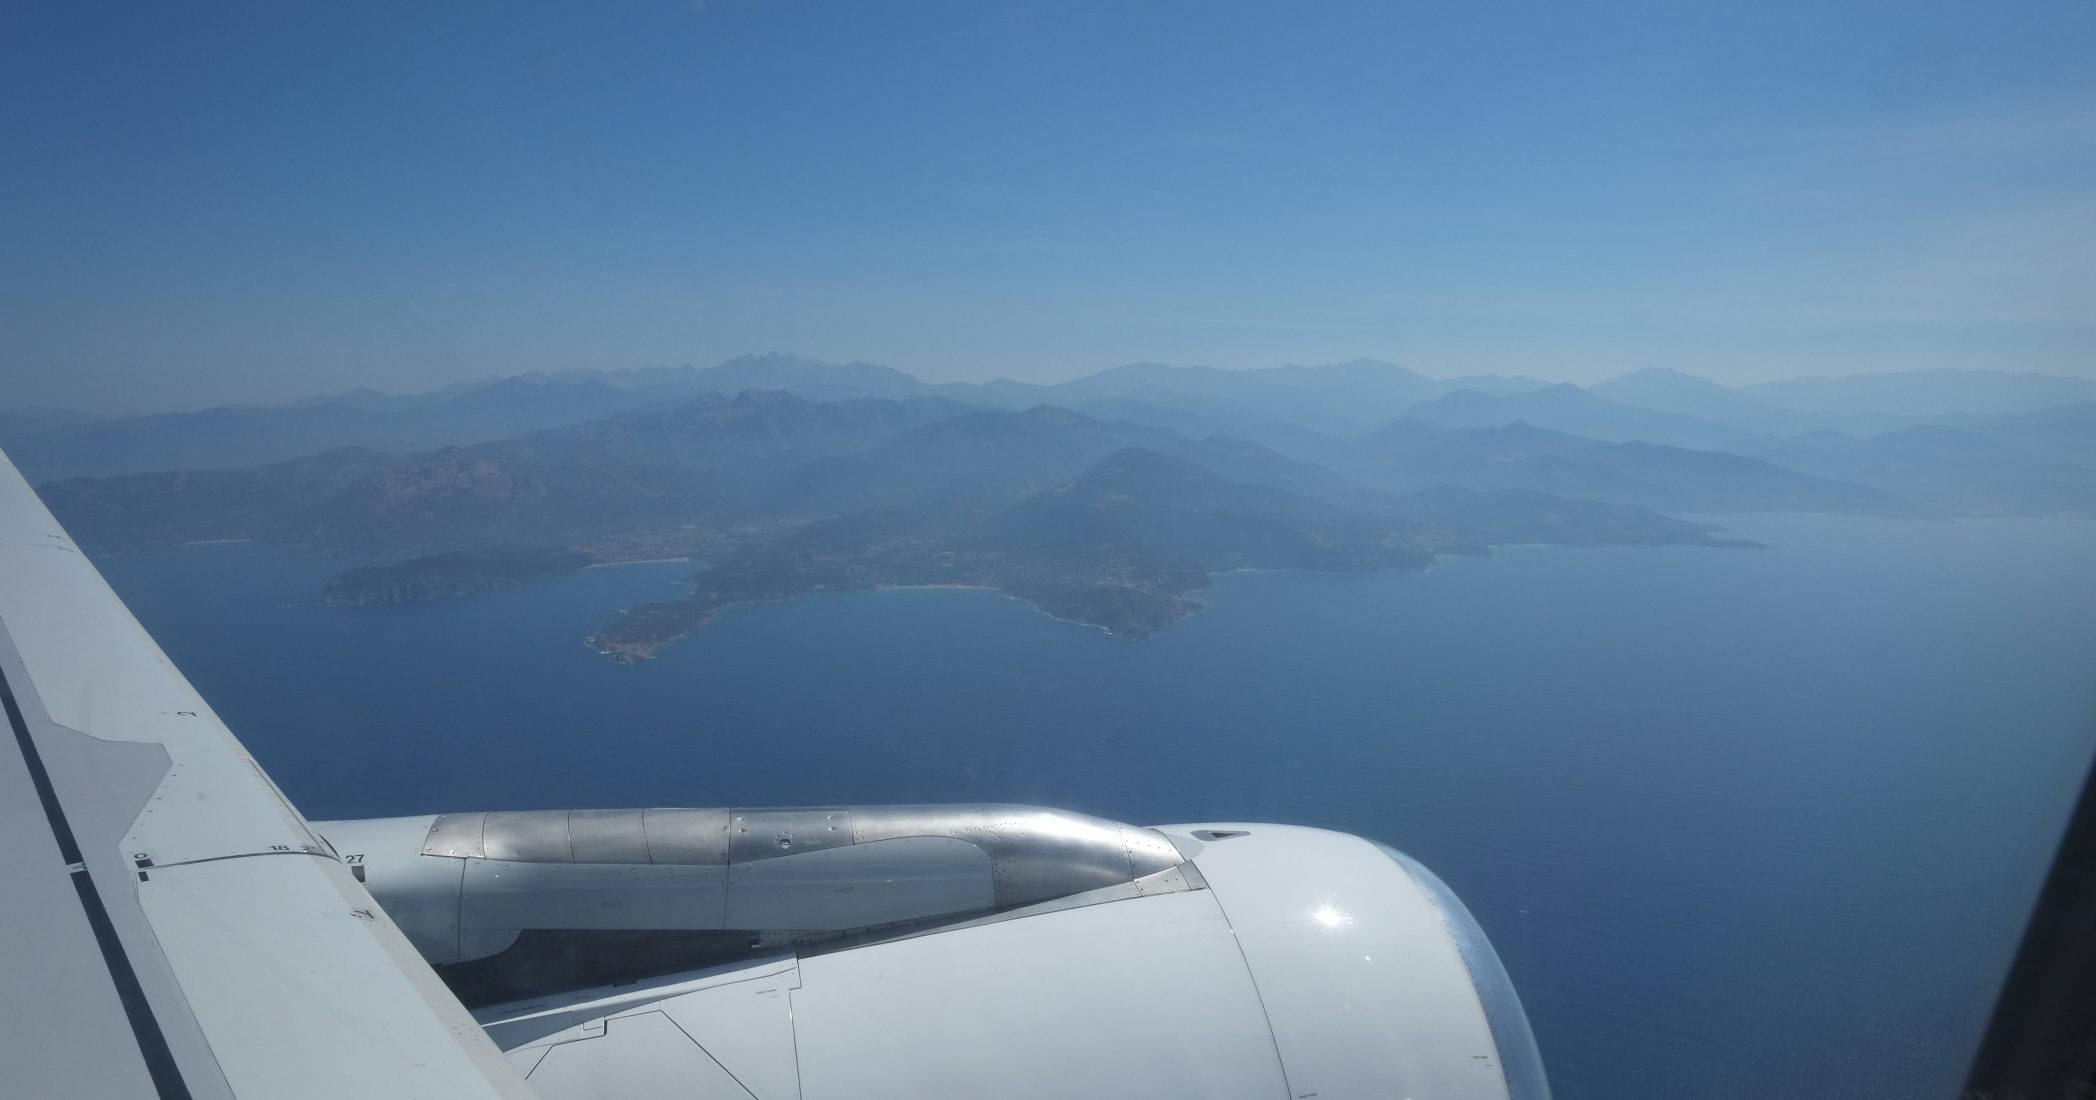 The view of the east side of Corsica